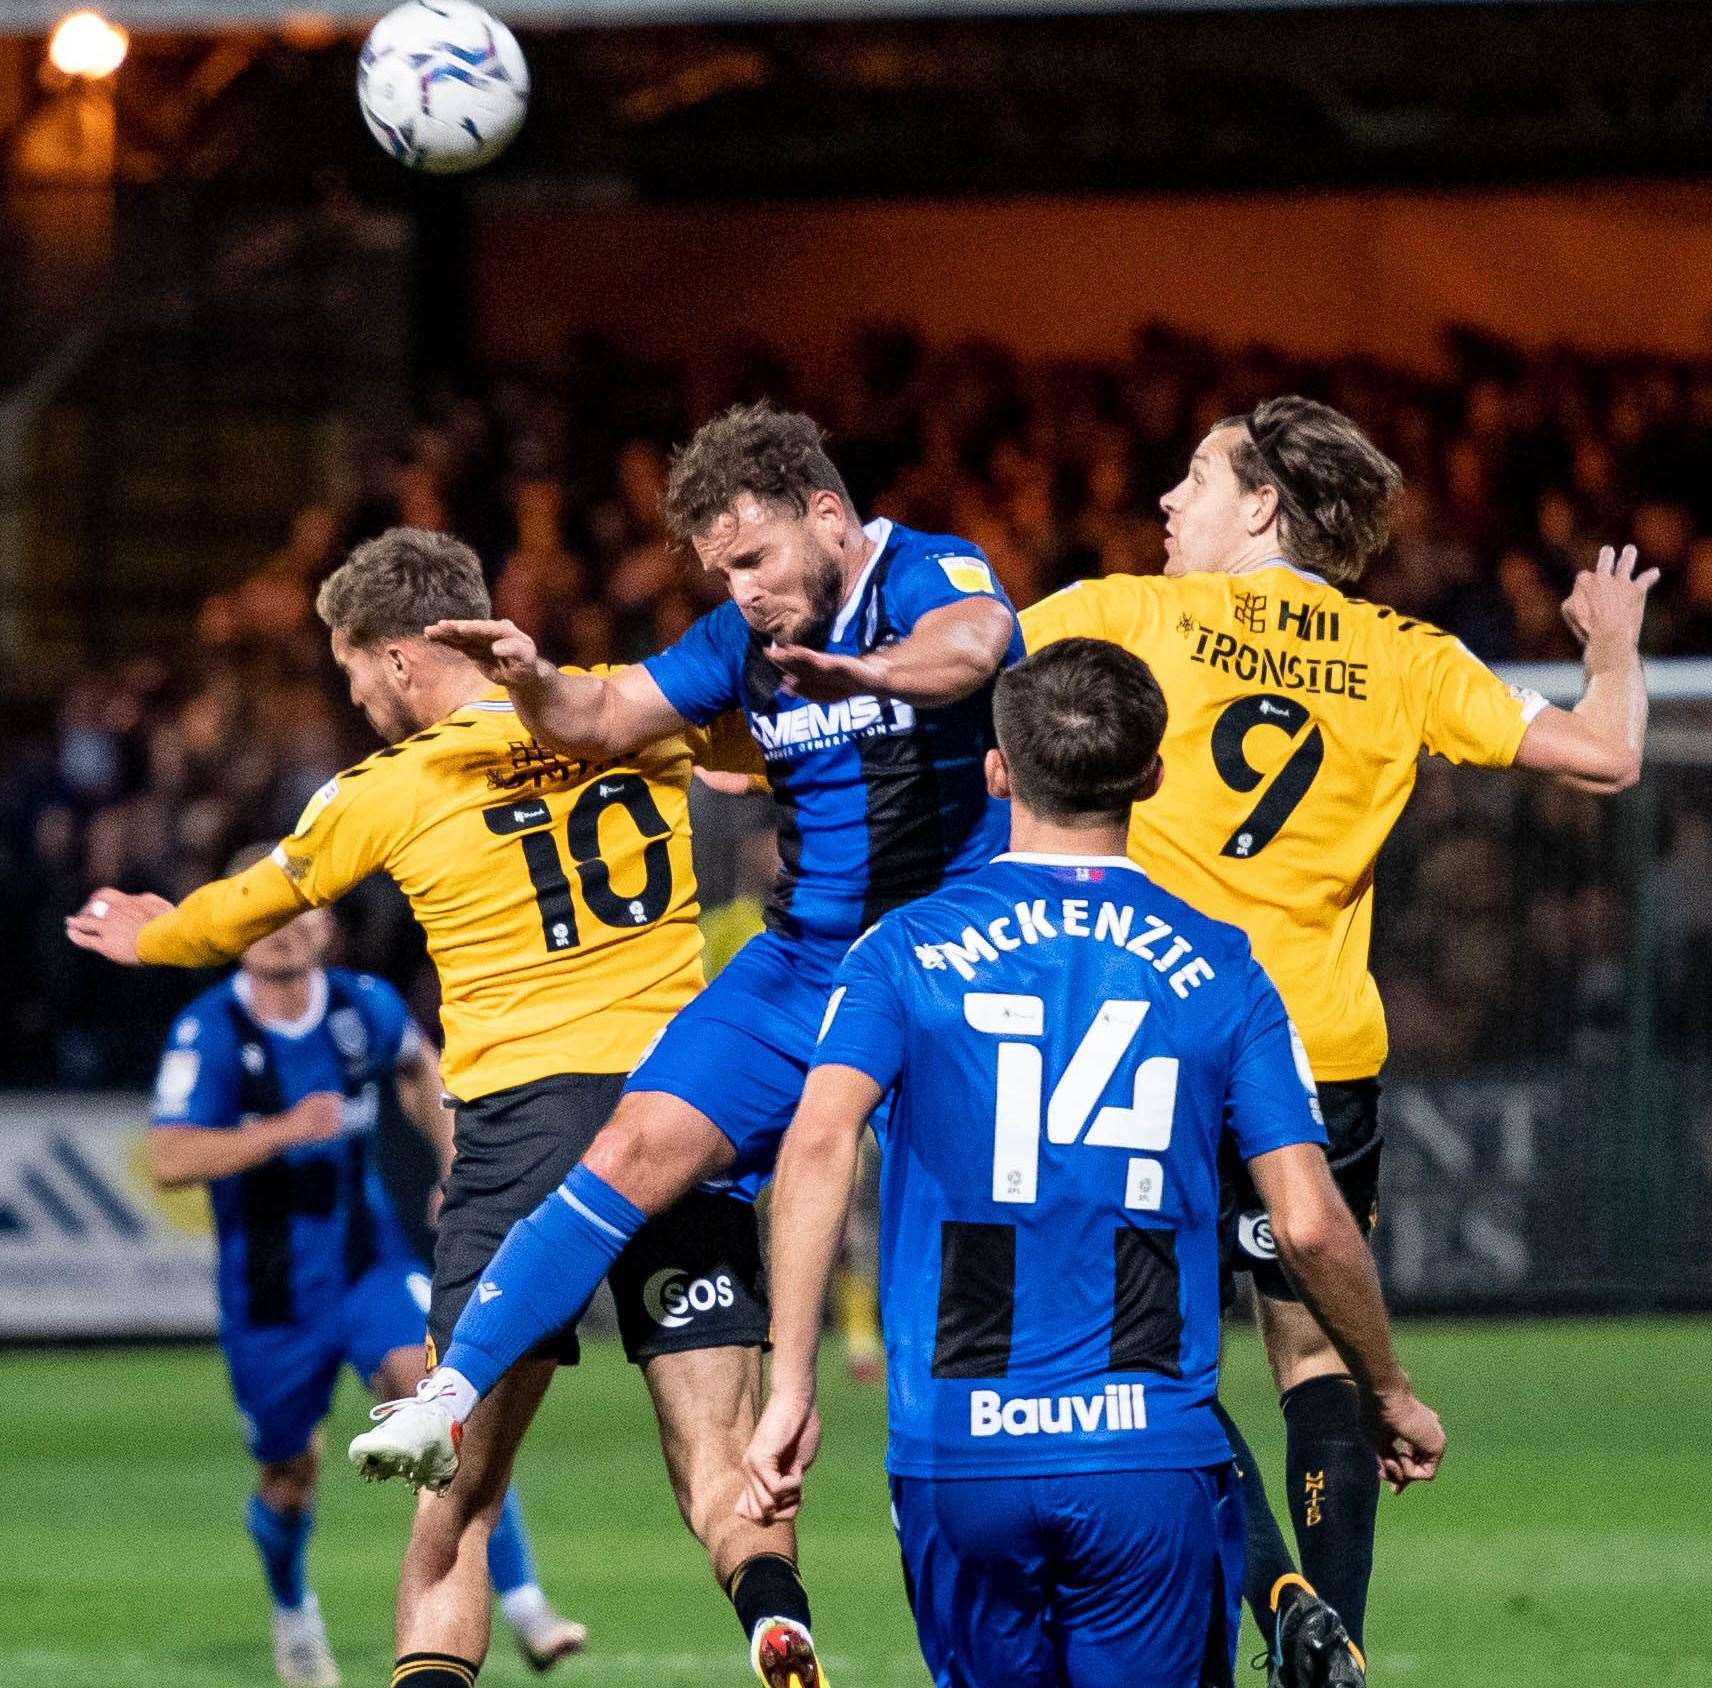 Gillingham challenge for the ball against Cambridge United Picture: Keith Heppell